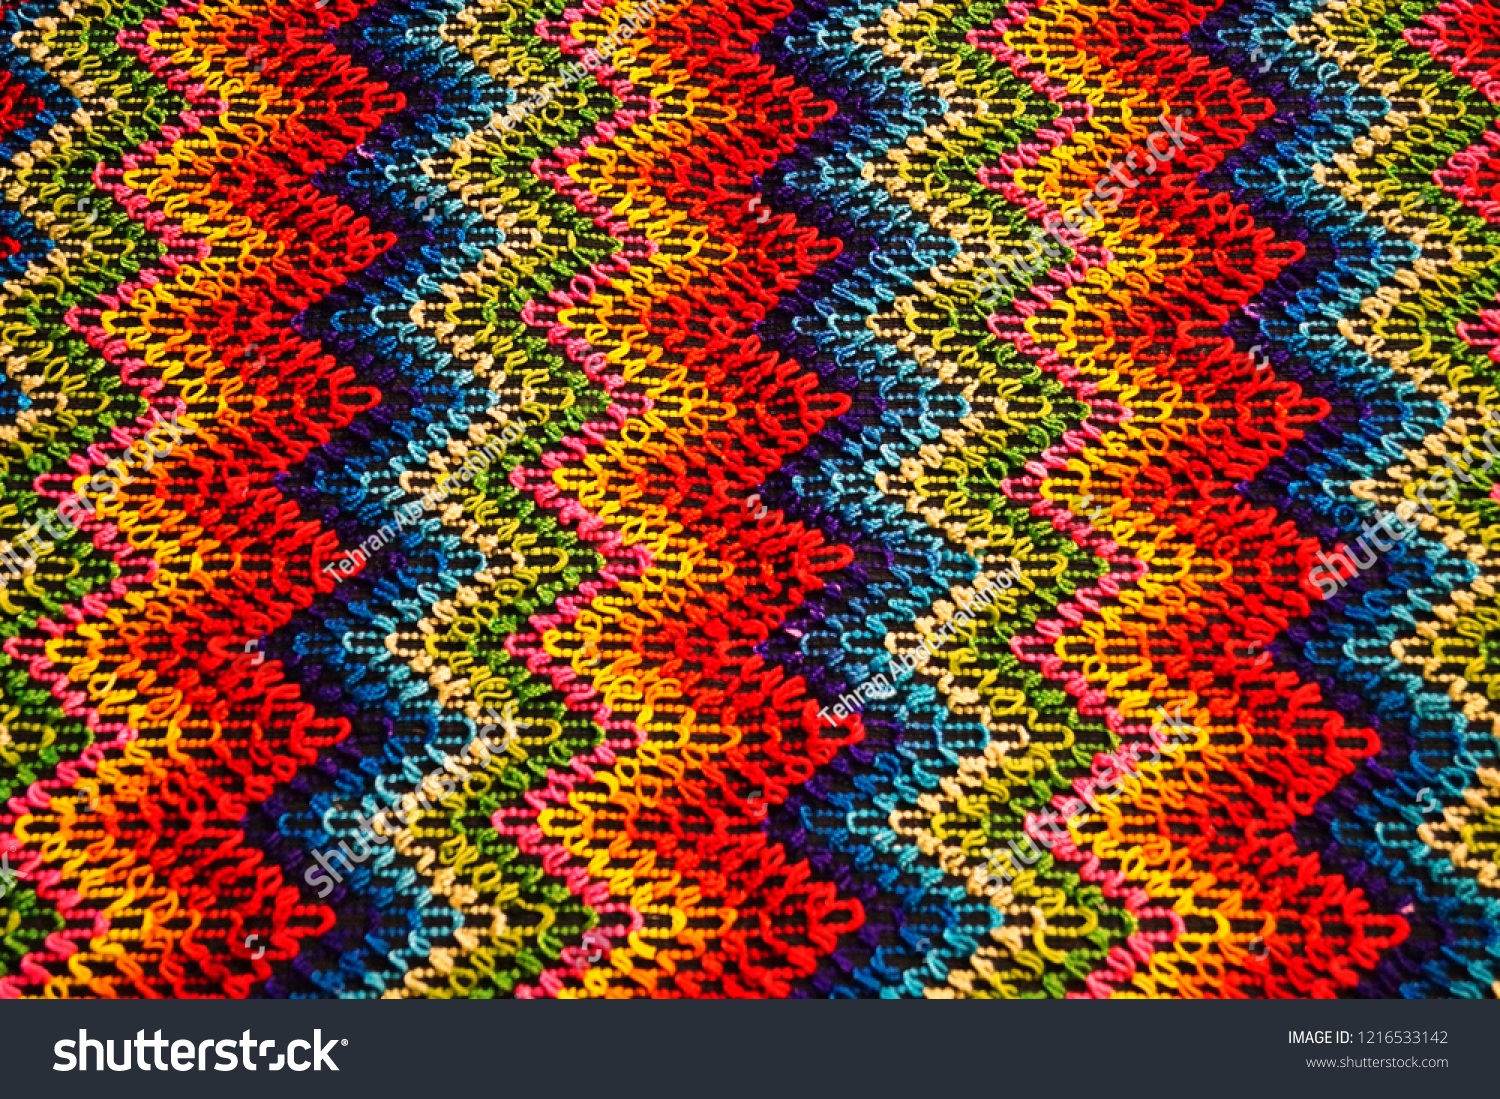 Multicolored zigzag patterns on traditional shawl in Moldova			 #1216533142